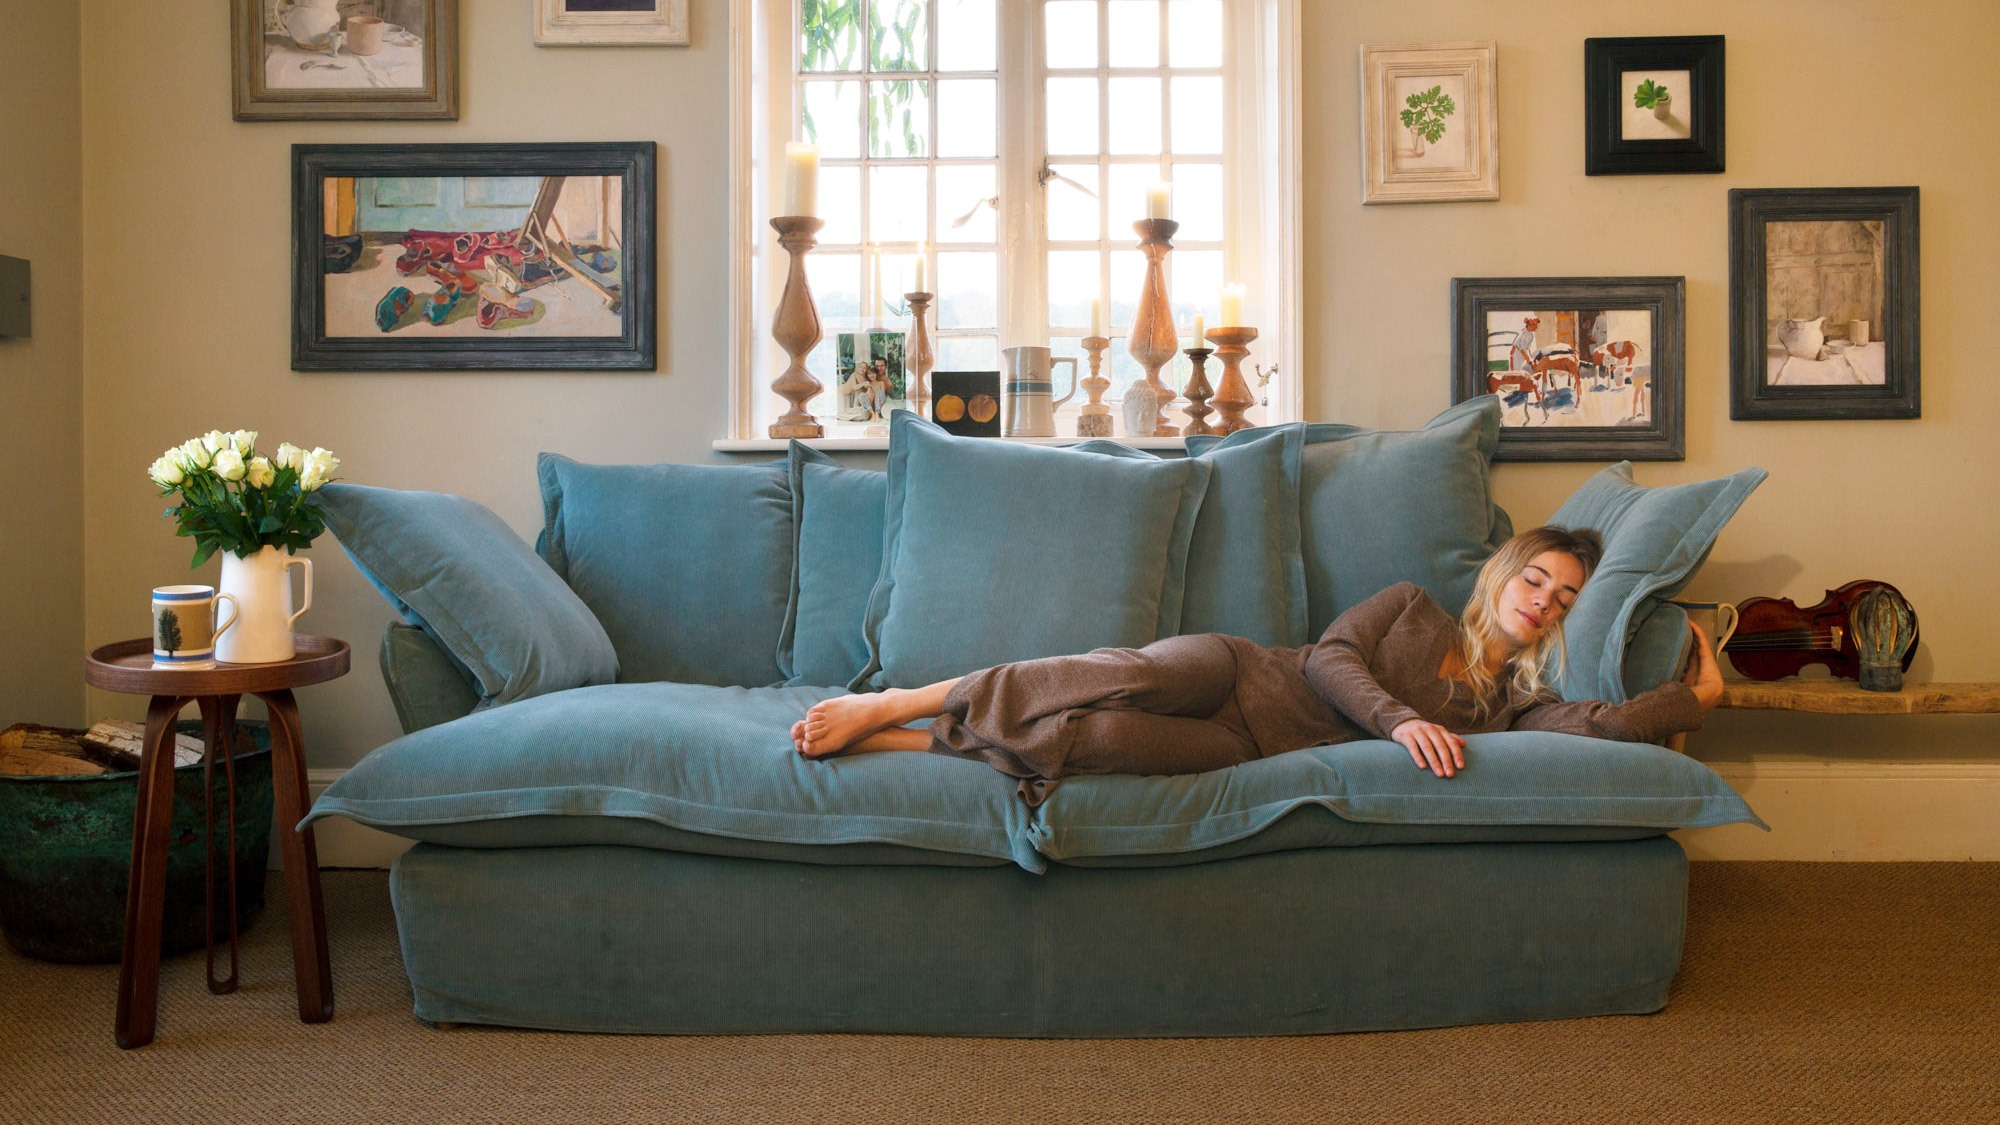 A woman lounging on a natural couch.